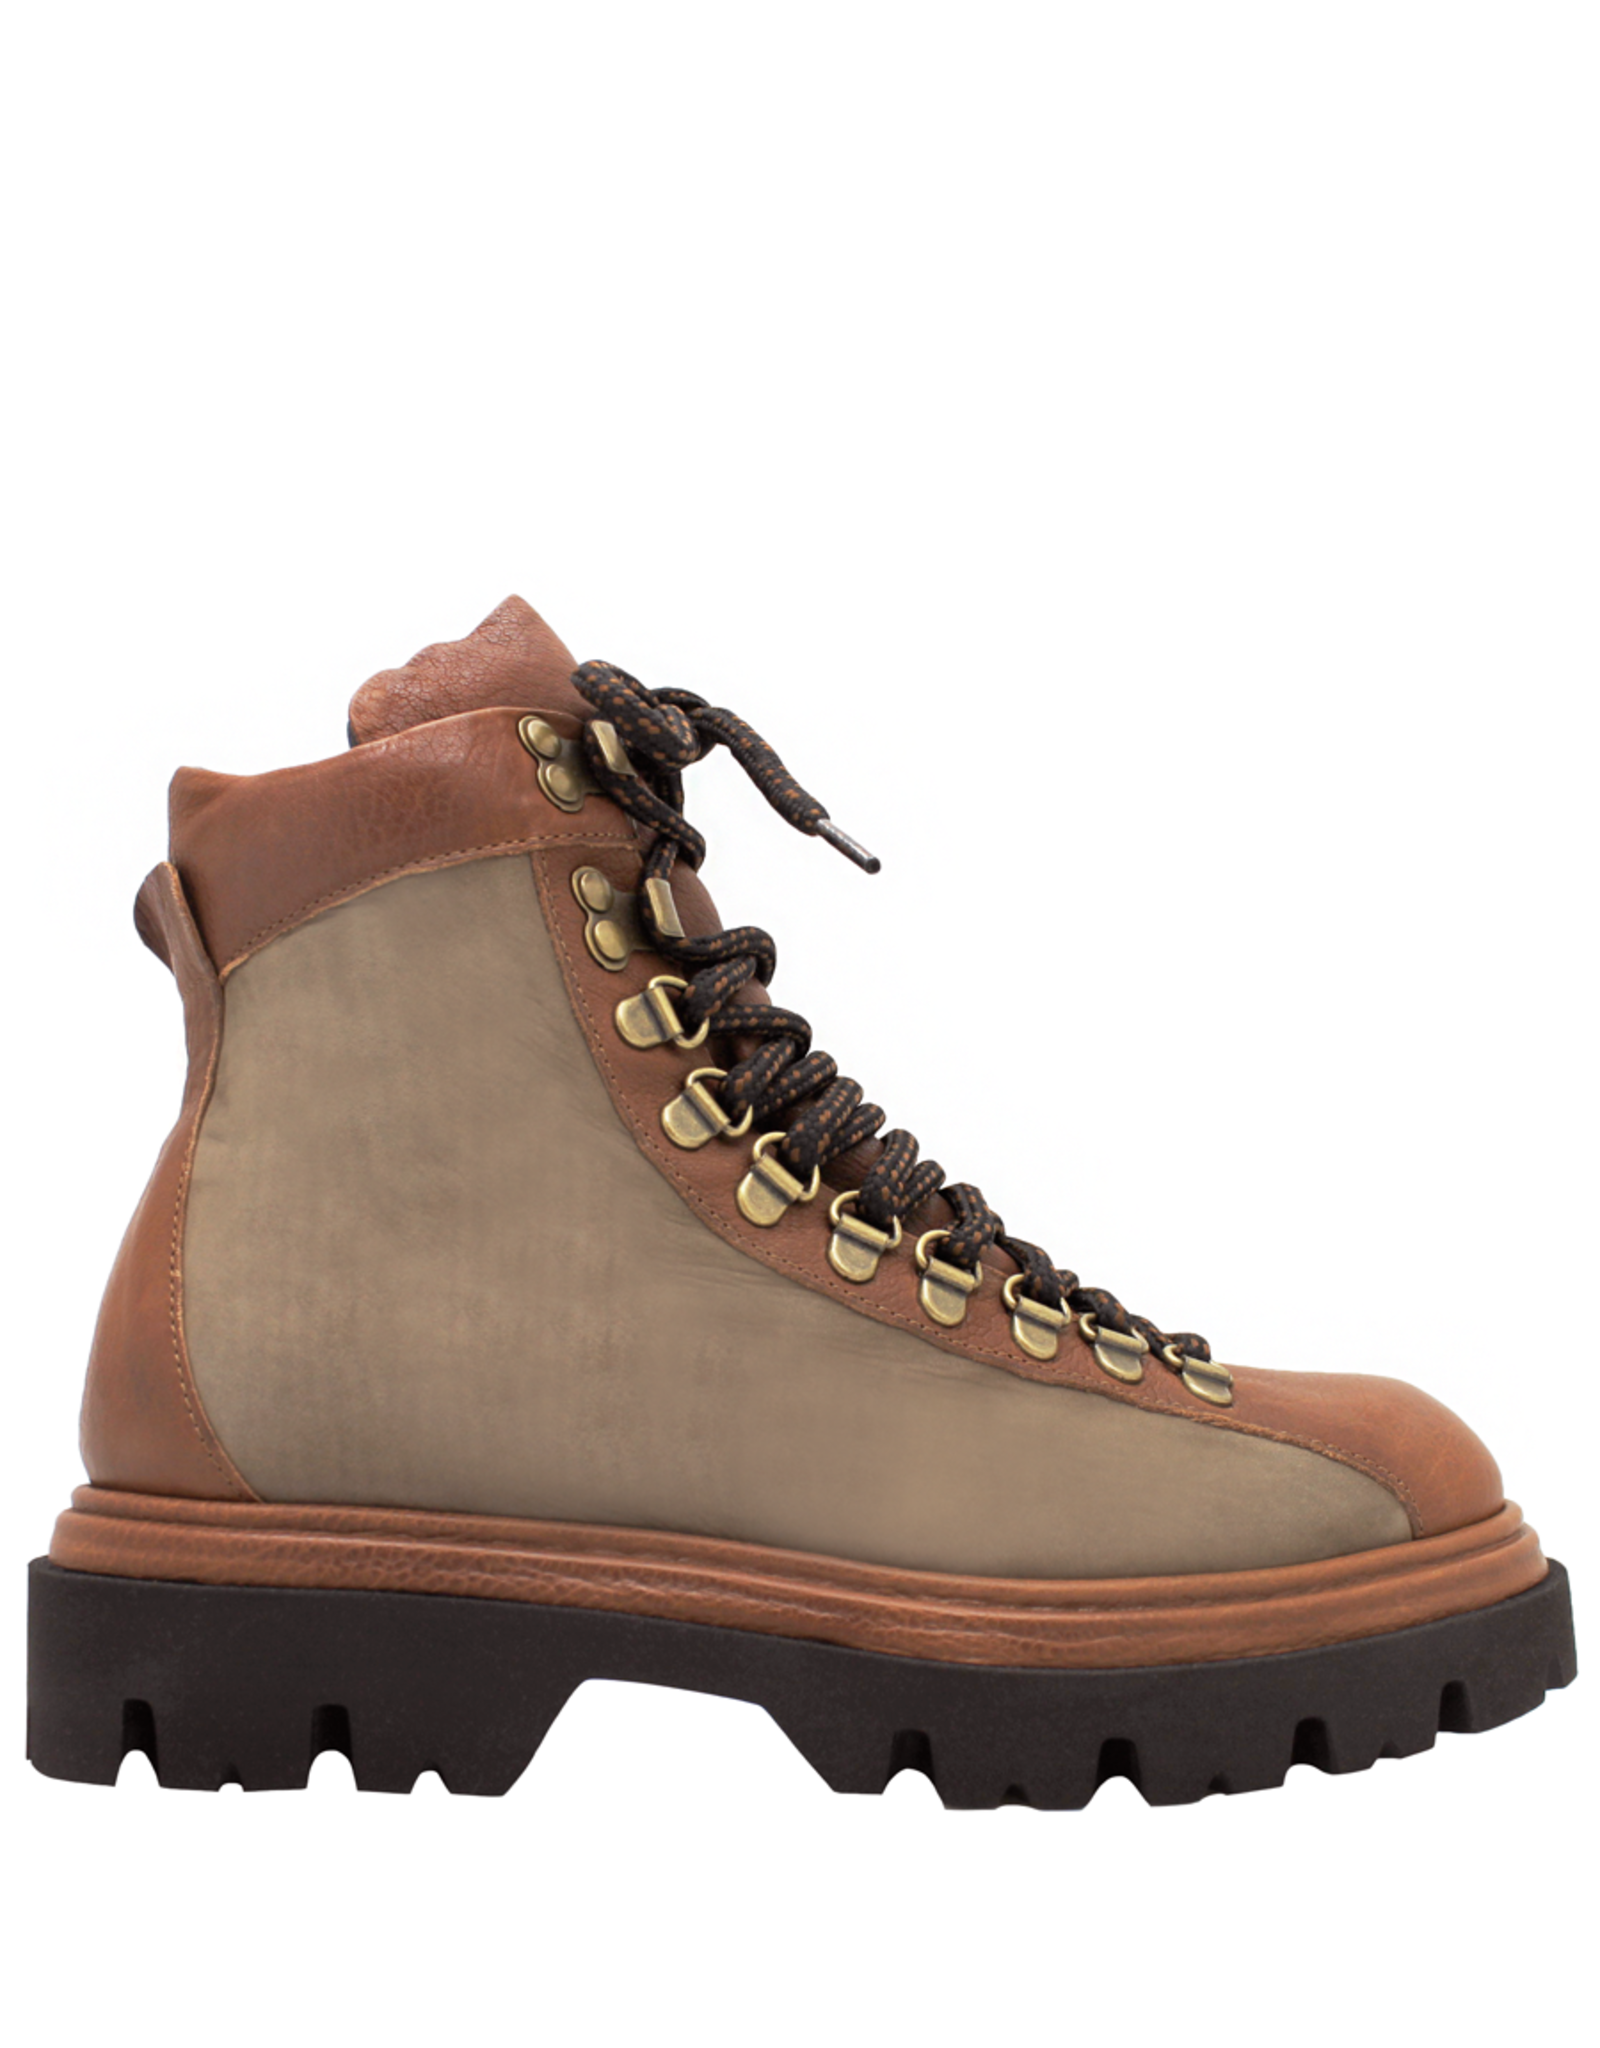 Now Now Camel /Taupe Lace-Up Tread Sole 7701